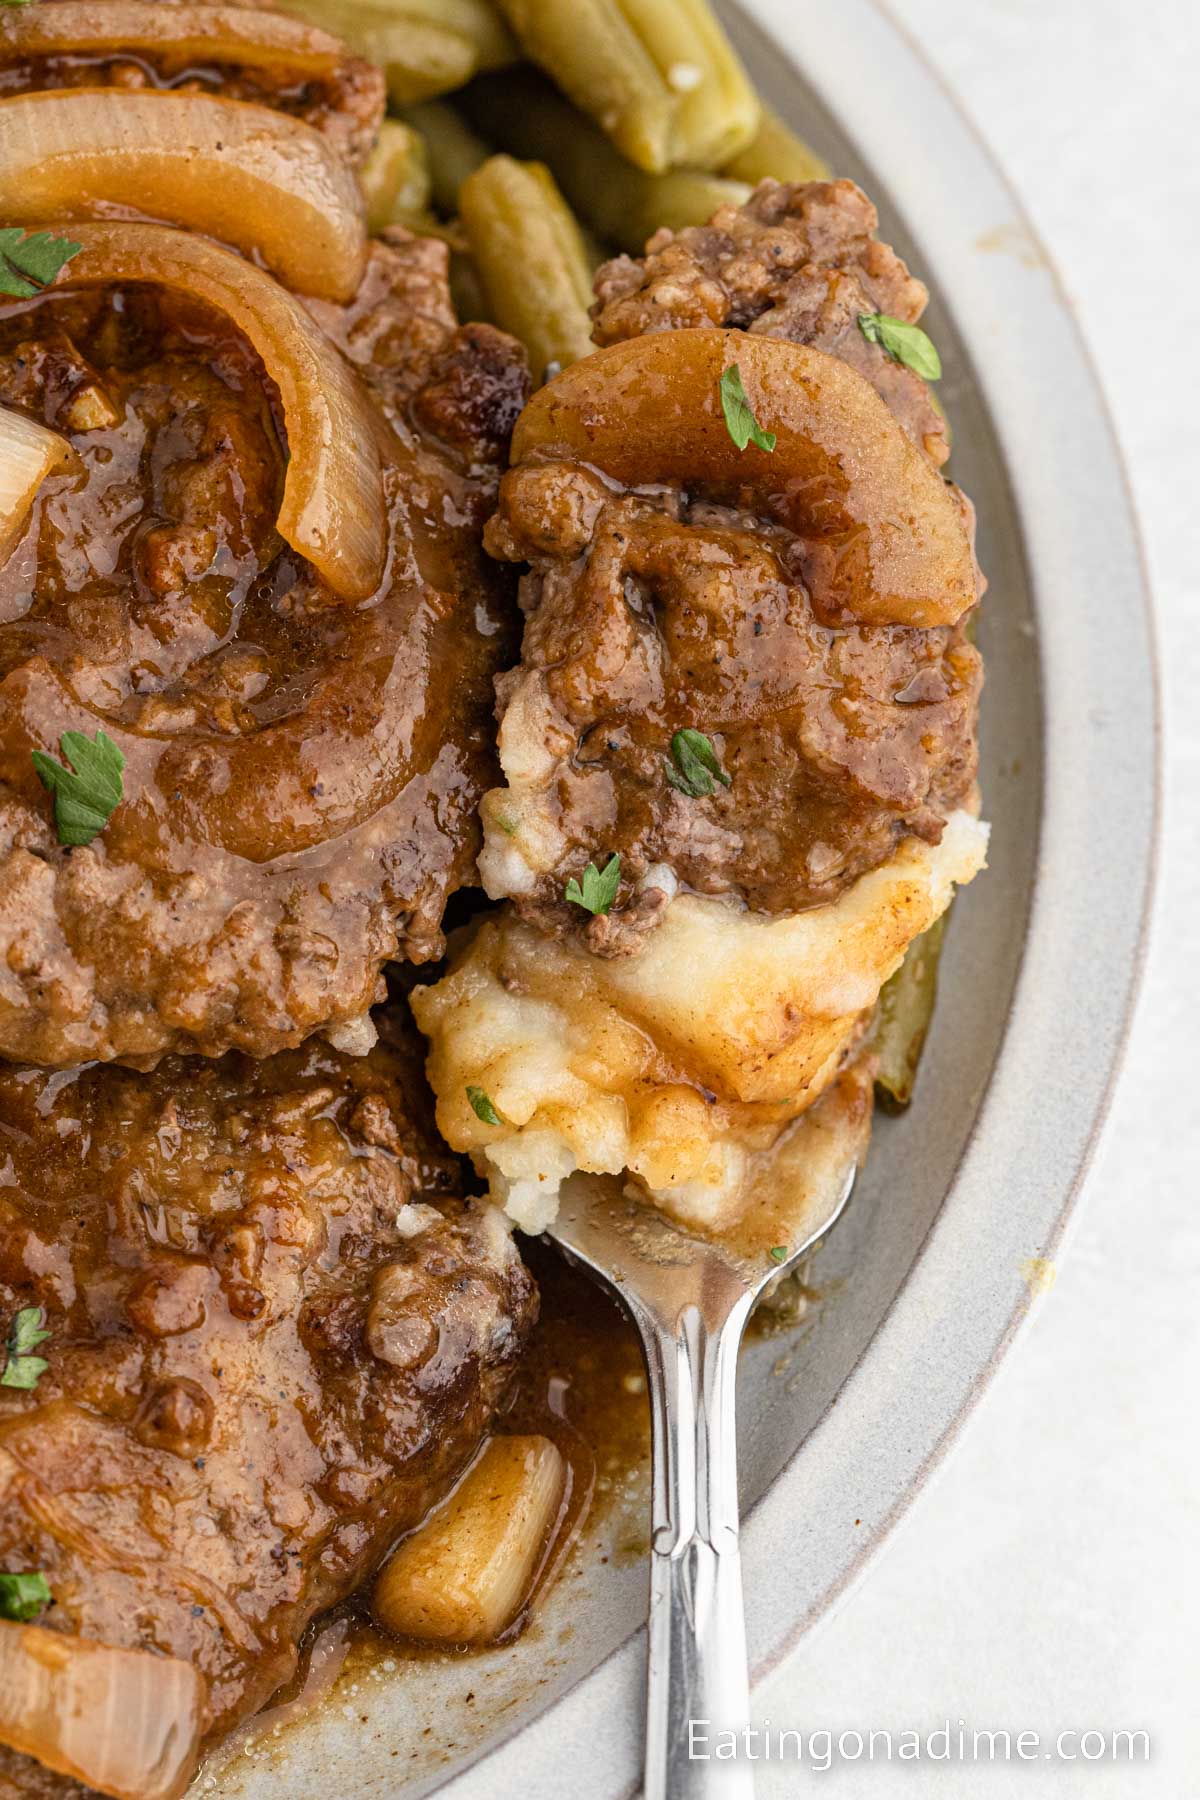 Cube Steak and gravy on a plate with mashed potatoes